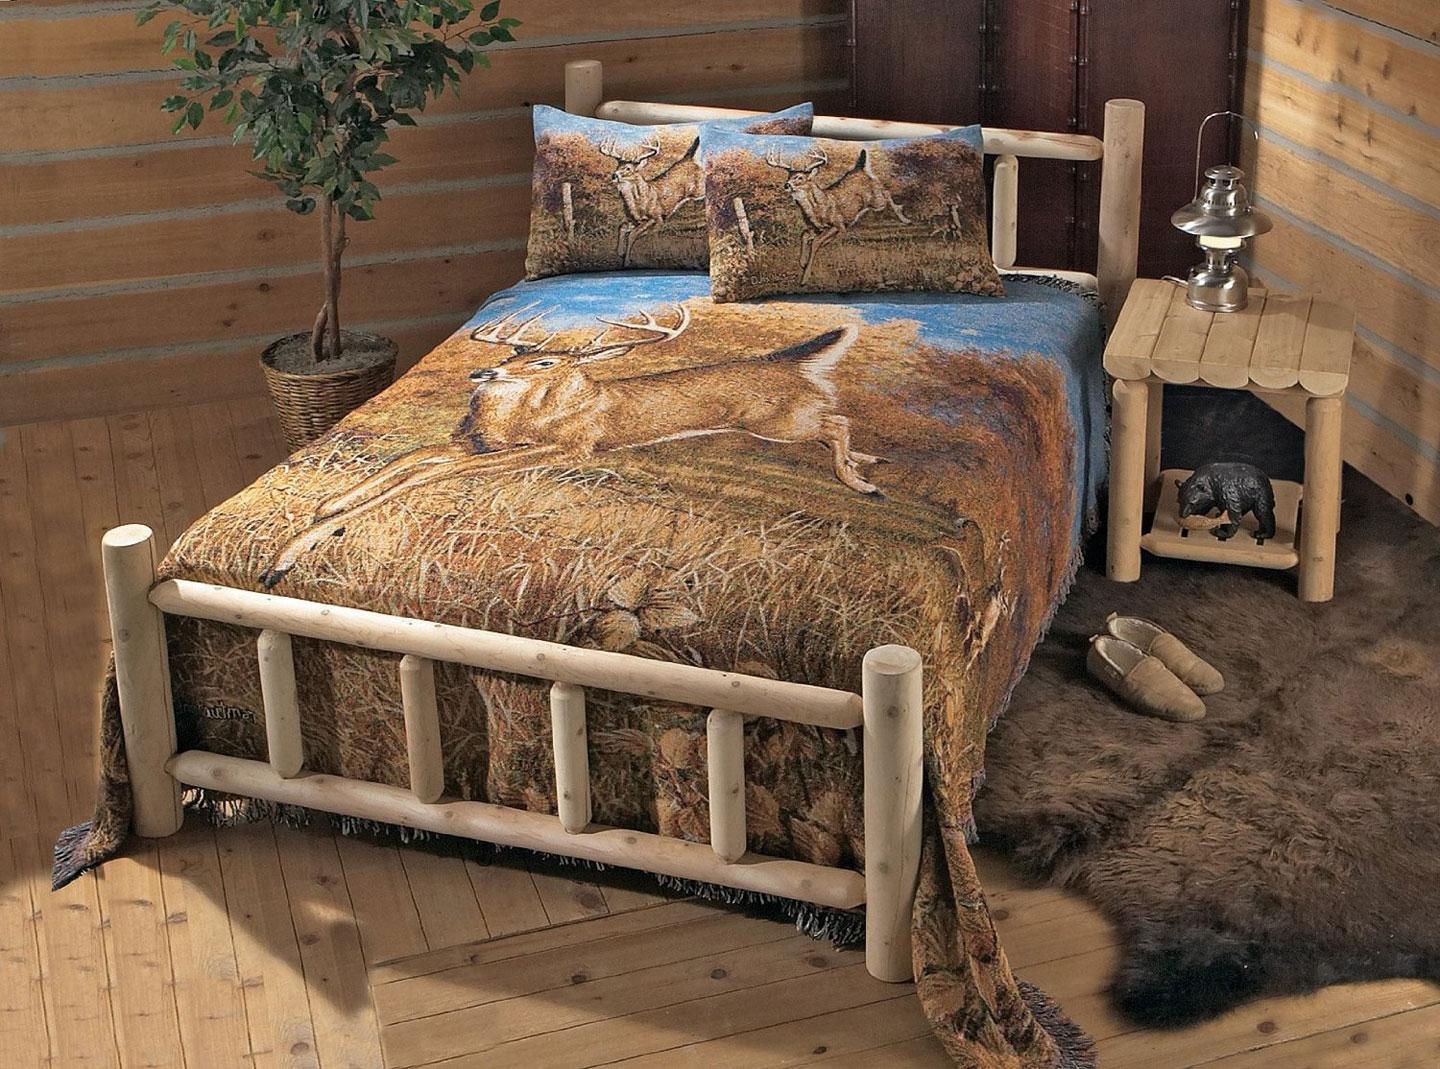 Great Animal Photograph Bedding Sets Feats Escorted By Grey Fur Rug And Trendy Rustic Antique Bedroom FurnitureBedroom Furniture Furniture + Accessories